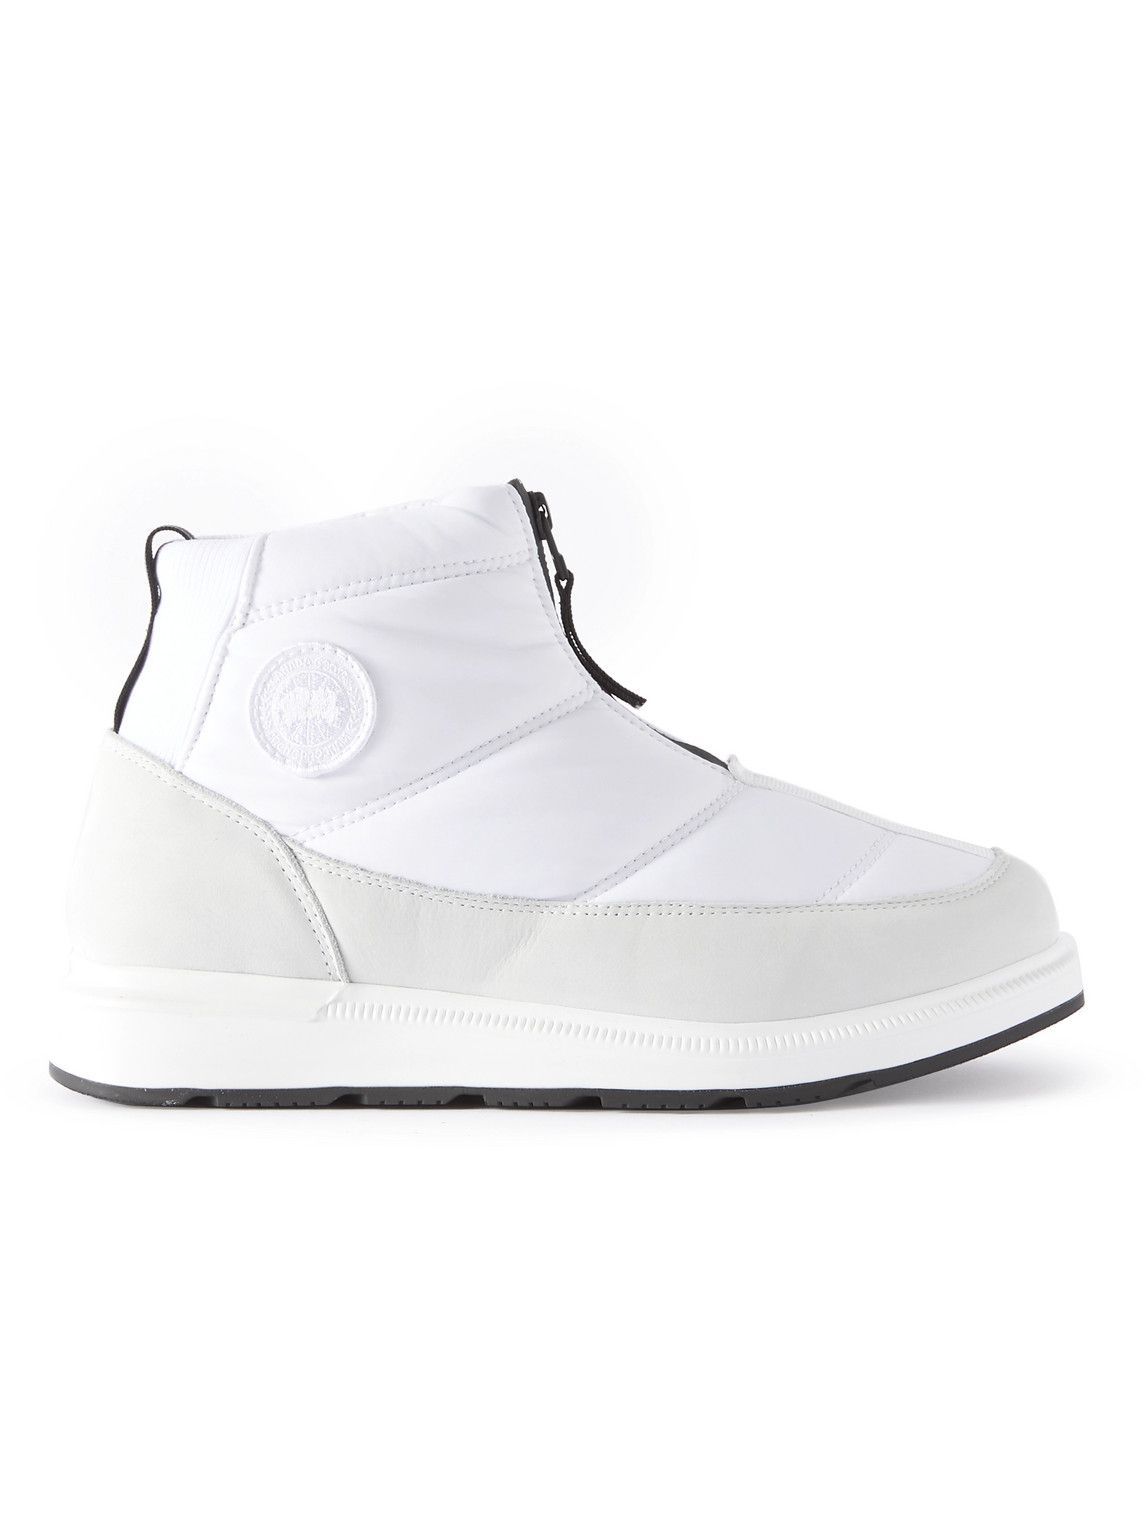 Photo: Canada Goose - Crofton Leather-Trimmed Quilted Shell Boots - White